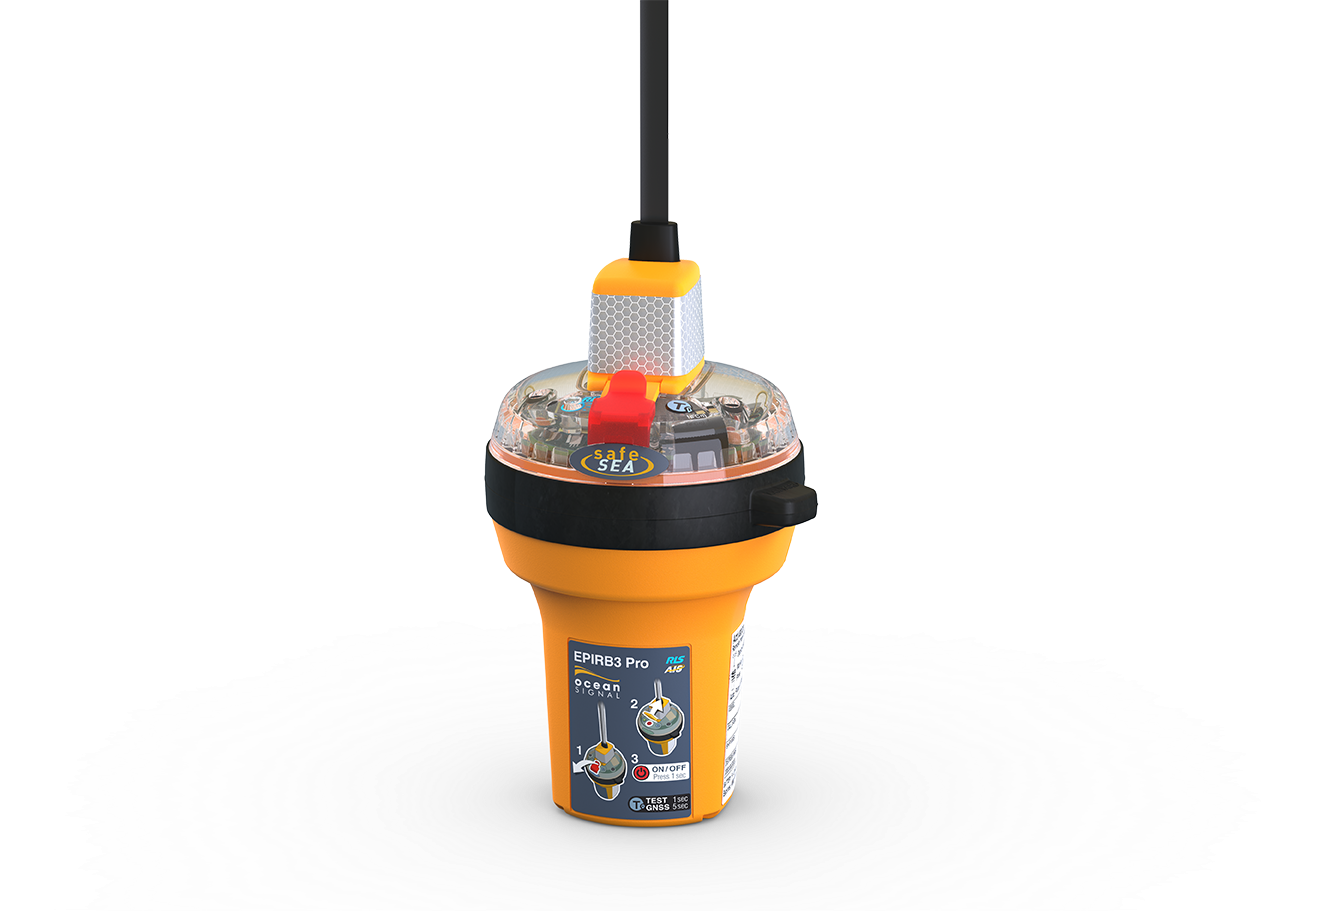  Ocean Signal - SafeSea EPIRB3 Pro. Emergency transmitter via satellite, AIS, RLS, GPS, bearing signal. Including housing with automatic release. 10 year battery, SOLAS